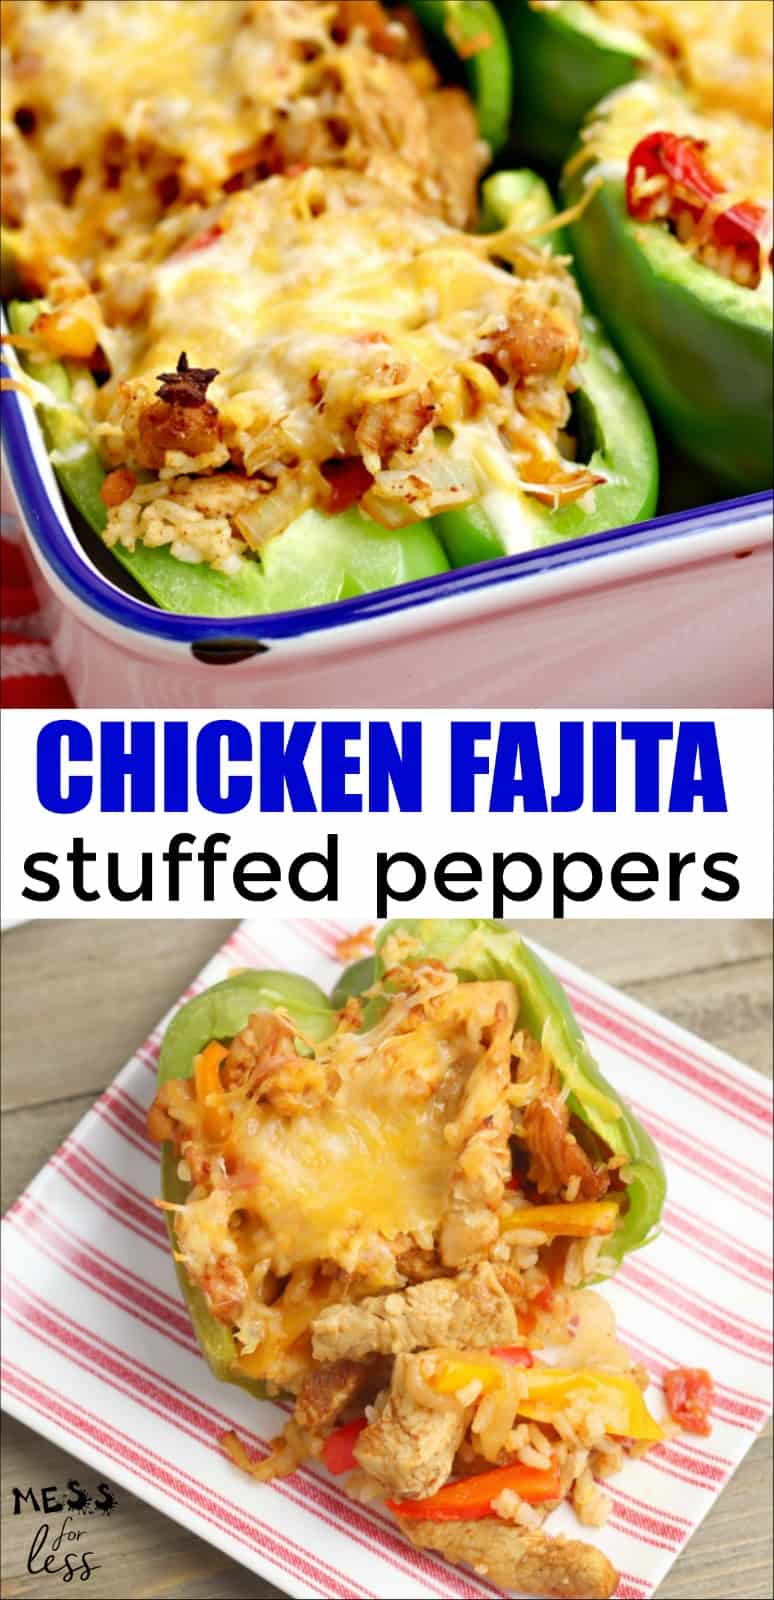 If you love chicken fajitas, then you need to try these Chicken Stuffed Peppers. Stuffed with your favorite fajita ingredients, these peppers are colorful and filling. #stuffedpeppers #chickenfajitas #recipes